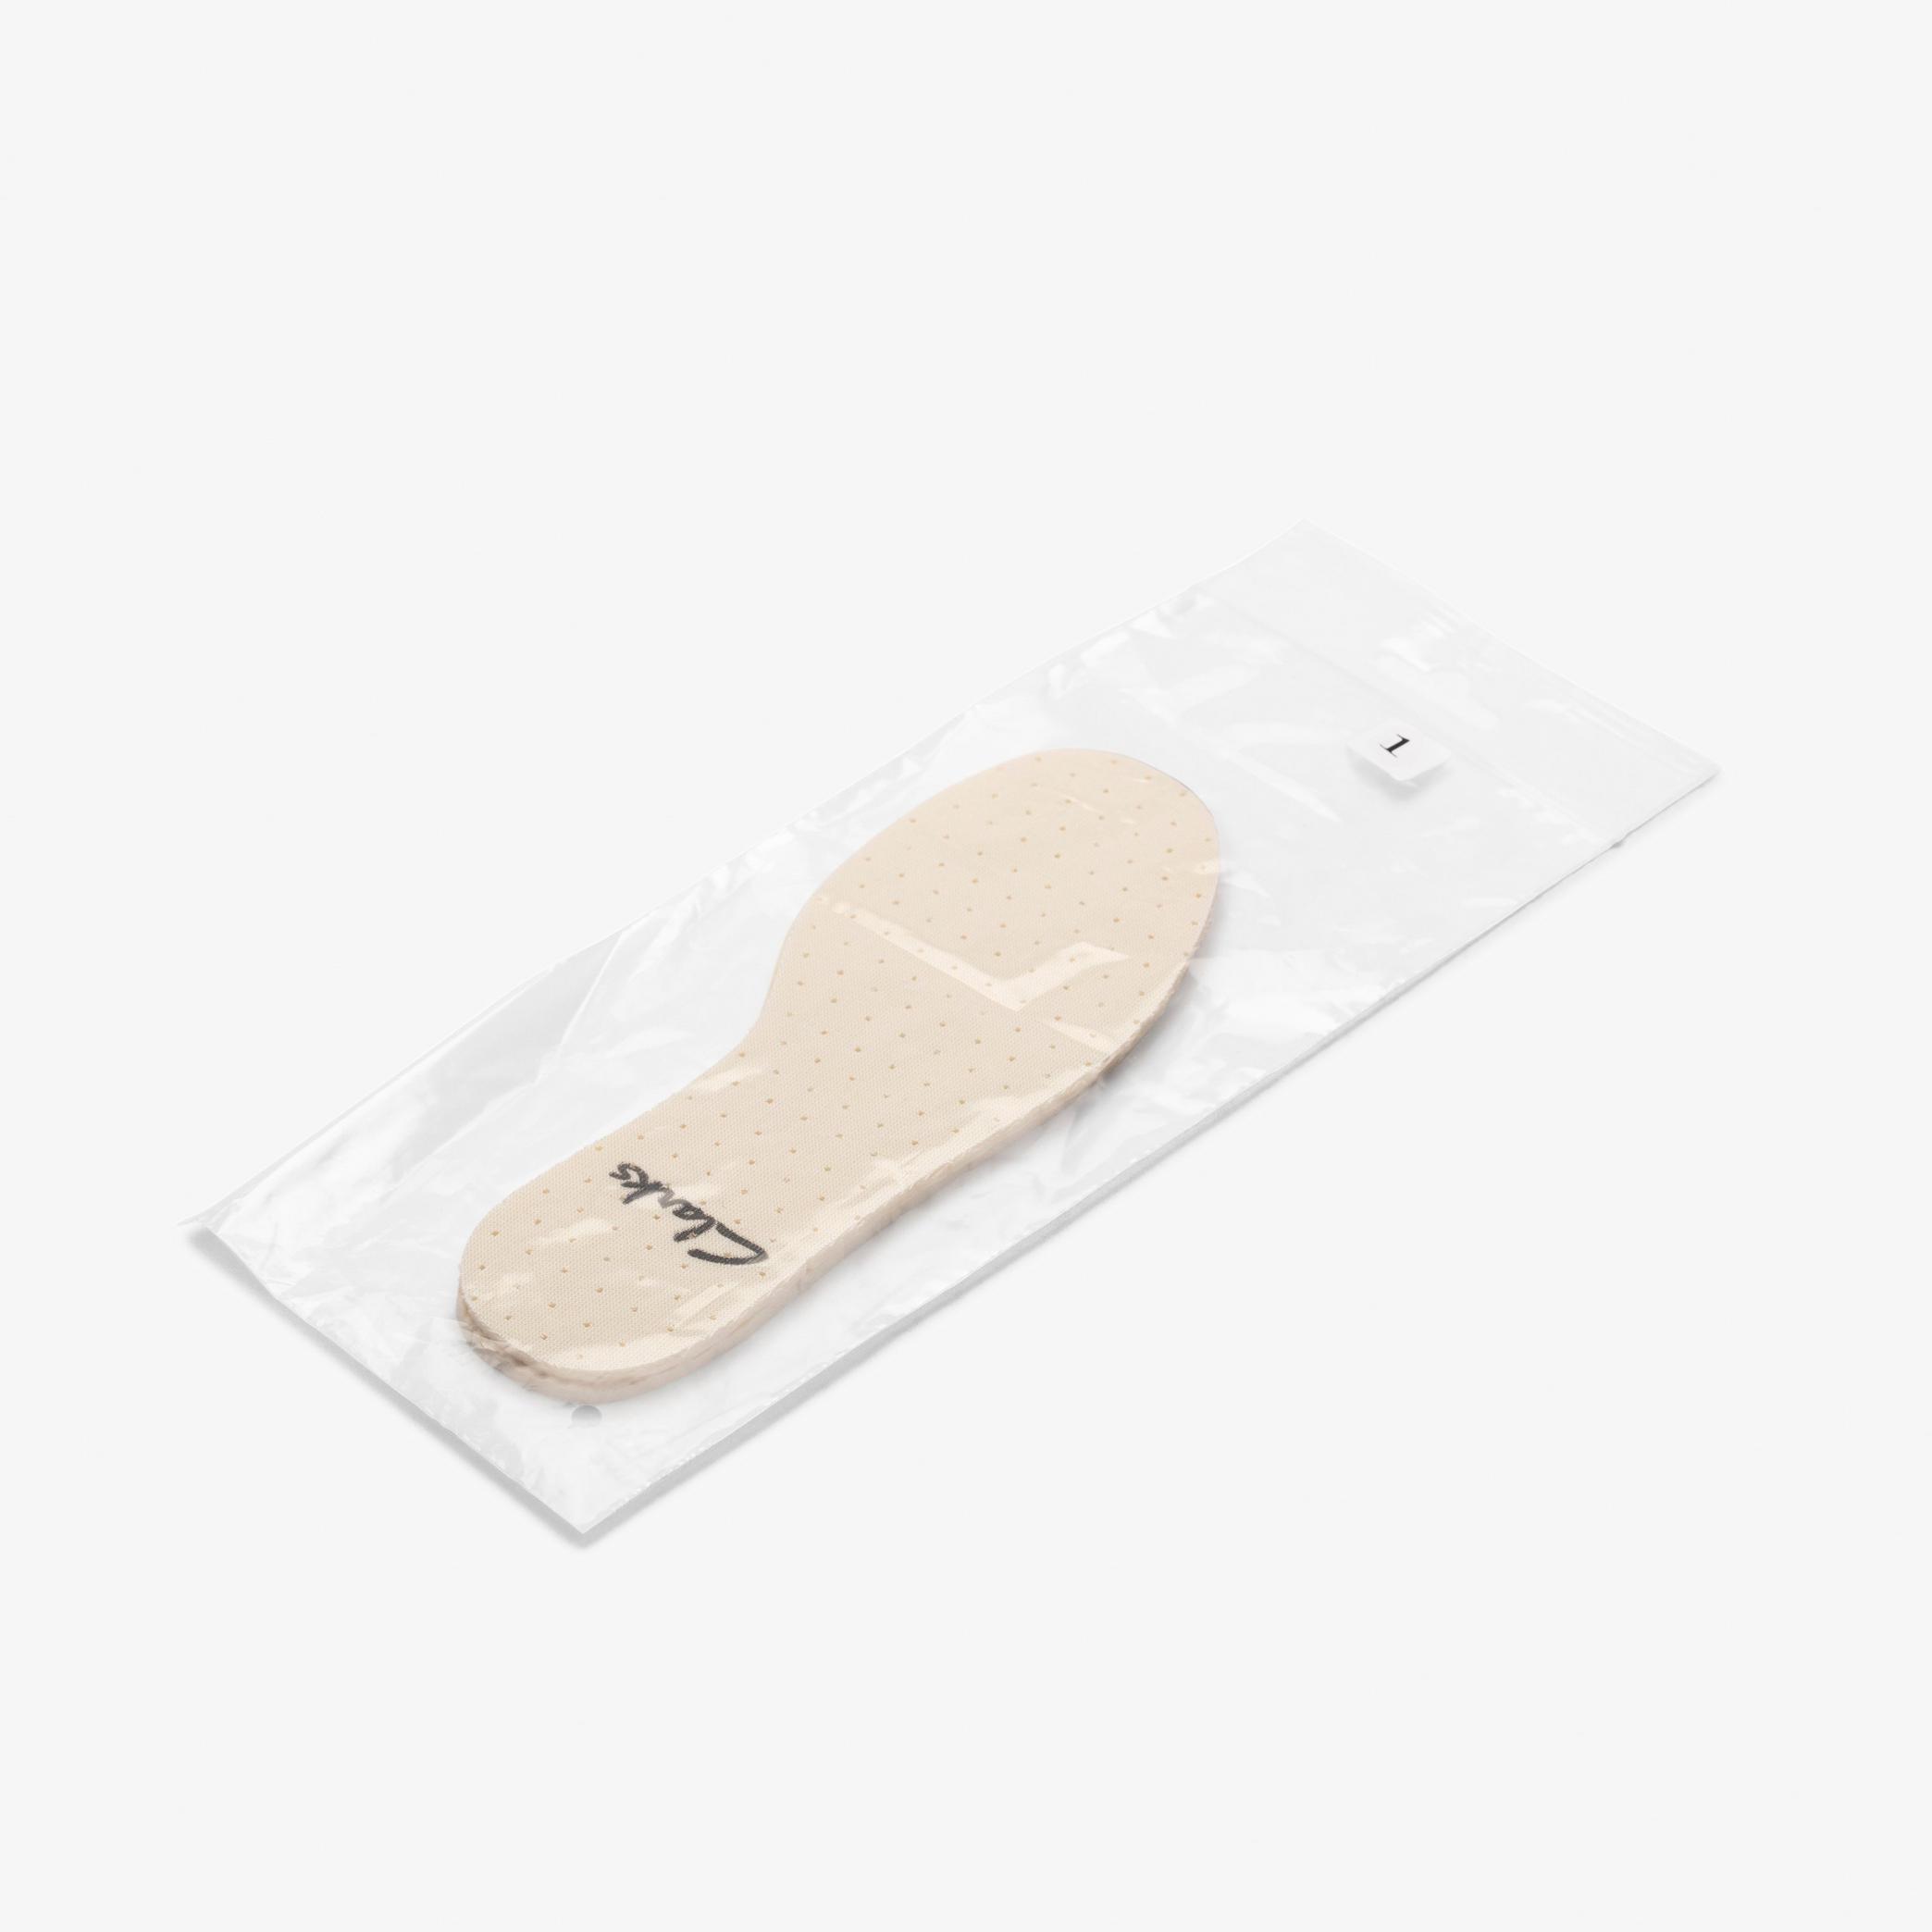 Sz1 Childs Foam Insoles  Insoles, view 1 of 2